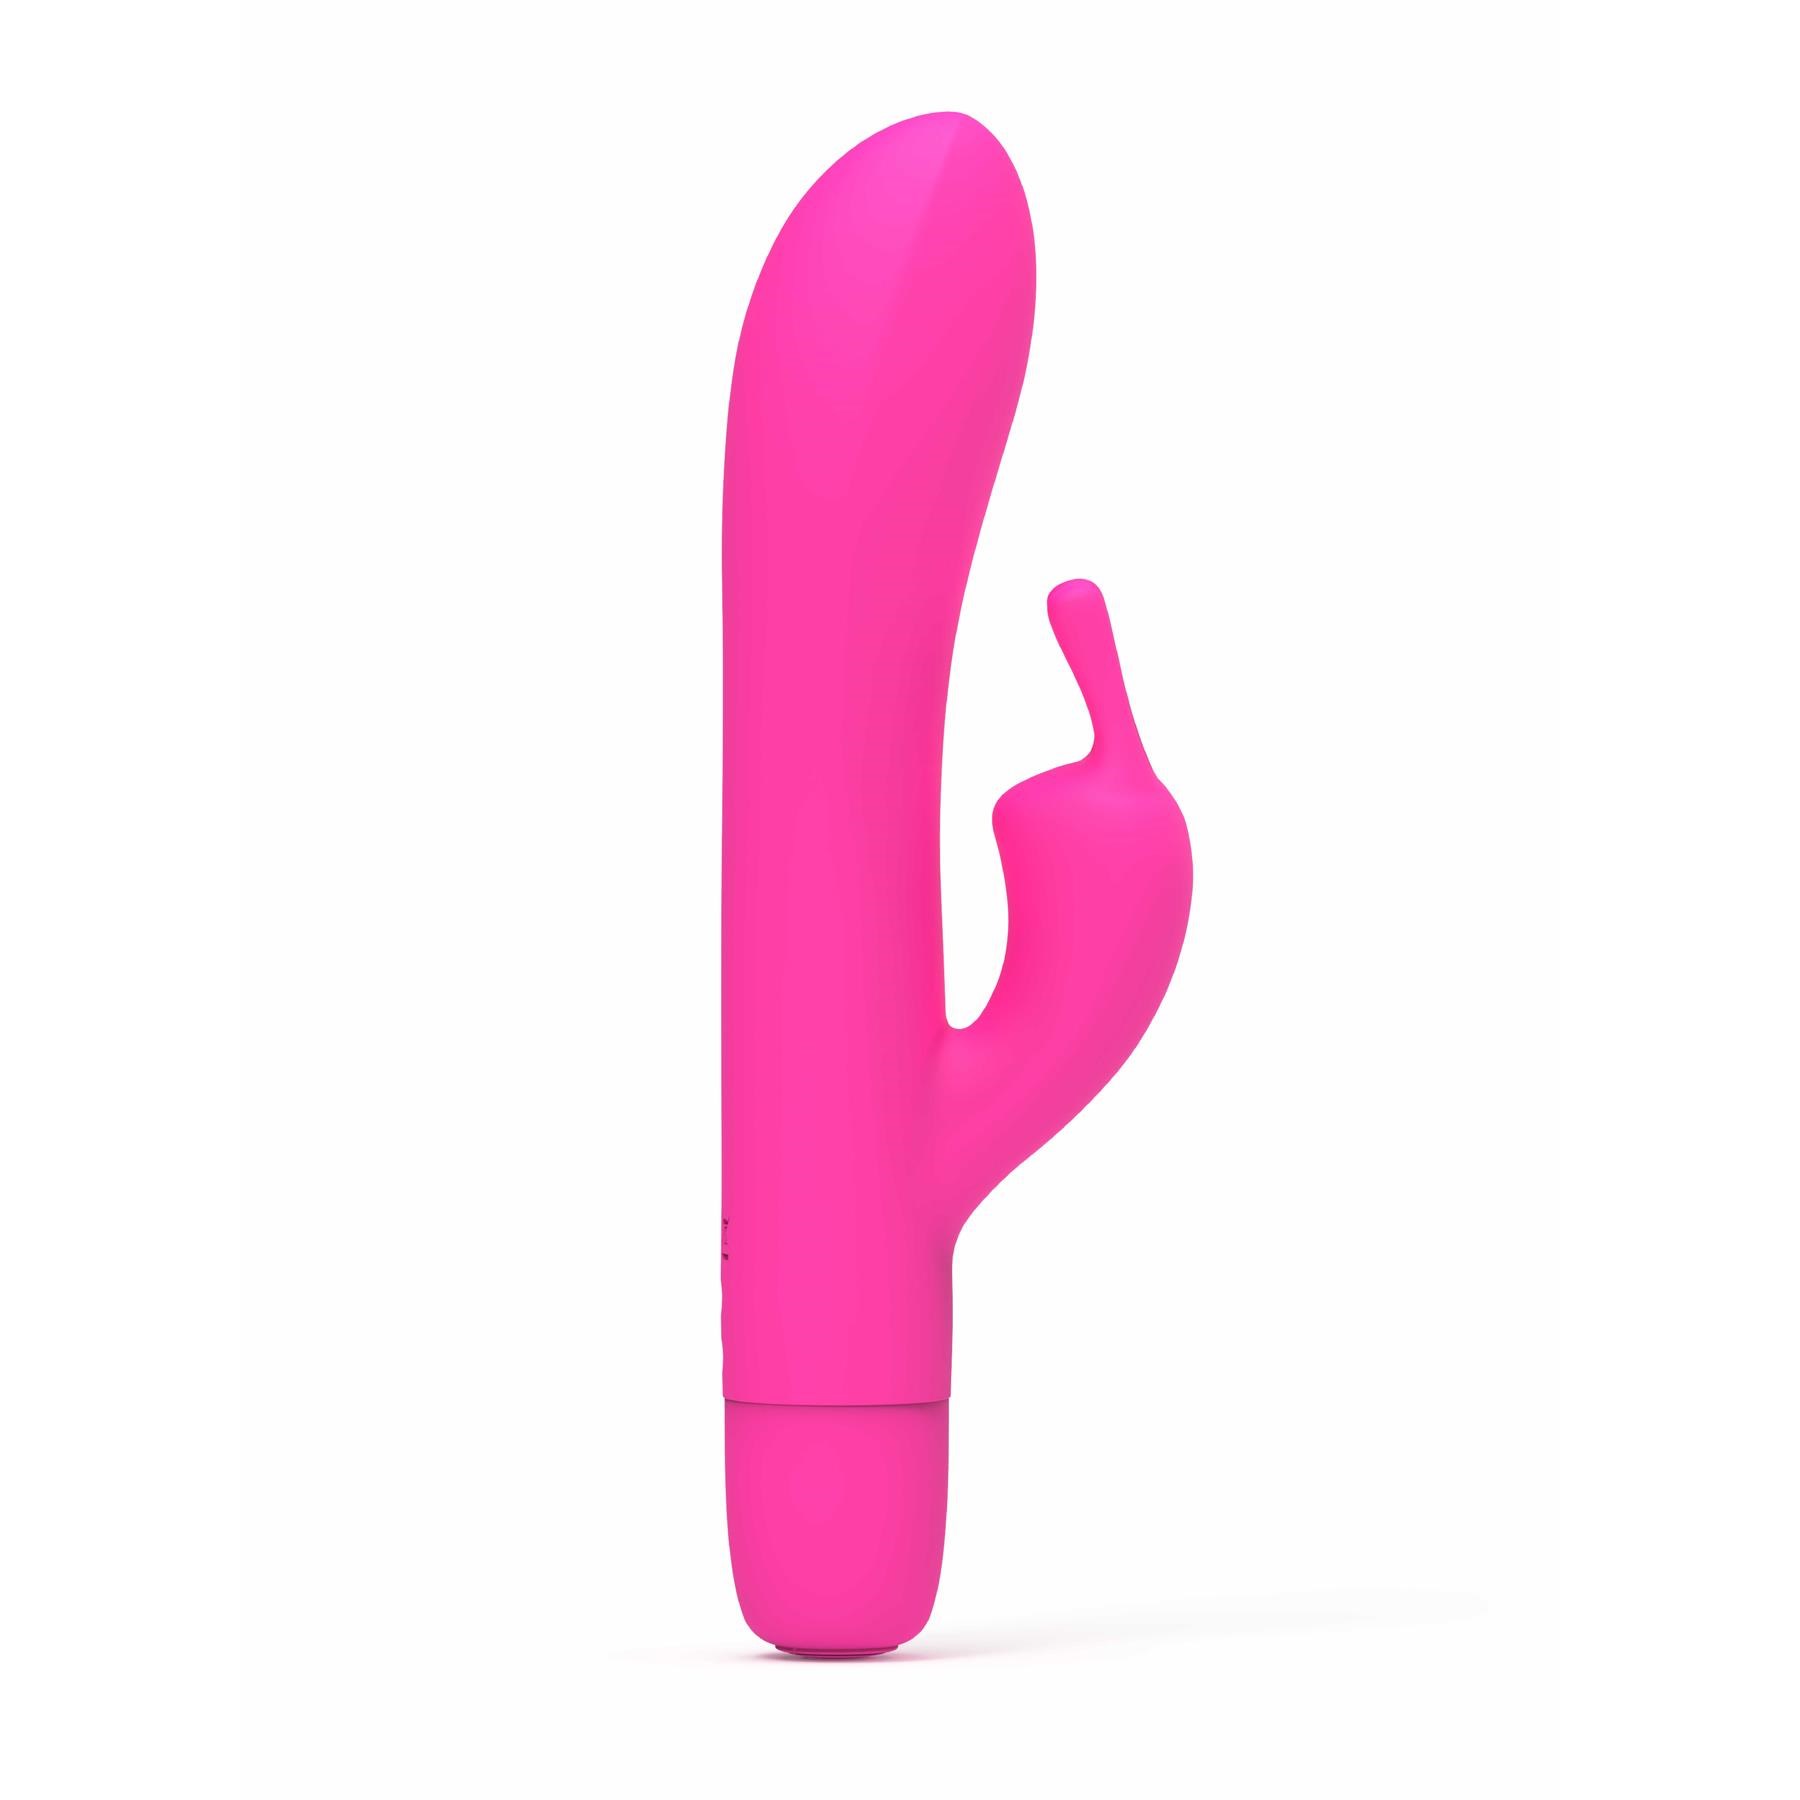 BSwish Bwild Bunny Classic Rechargeable Vibrator - Product Shot - Pink